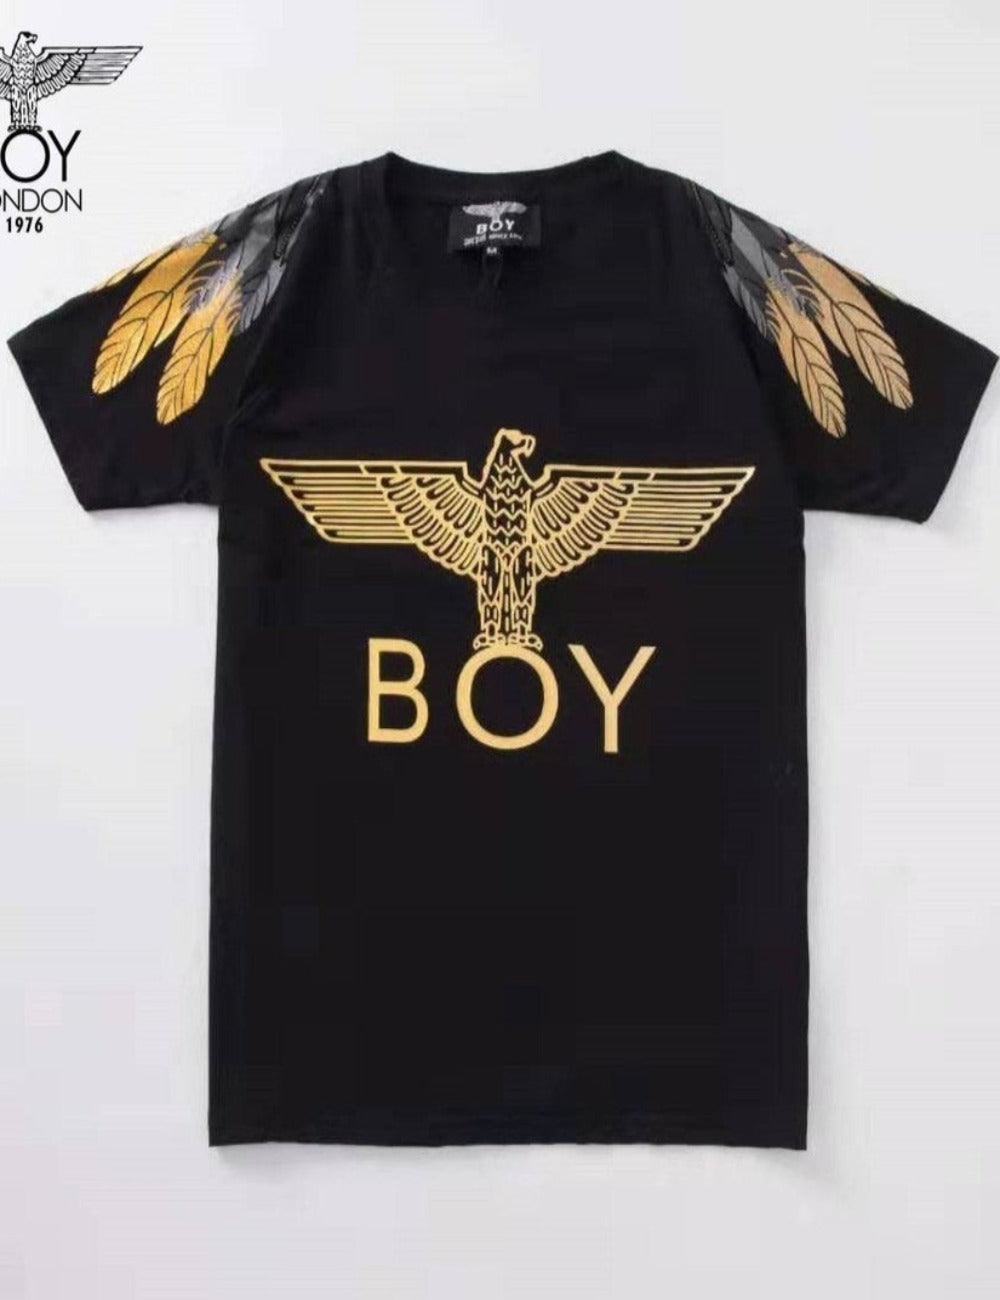 Boy London Grey Gold Eagle Feather Wings Tee (Black) – The Factory KL